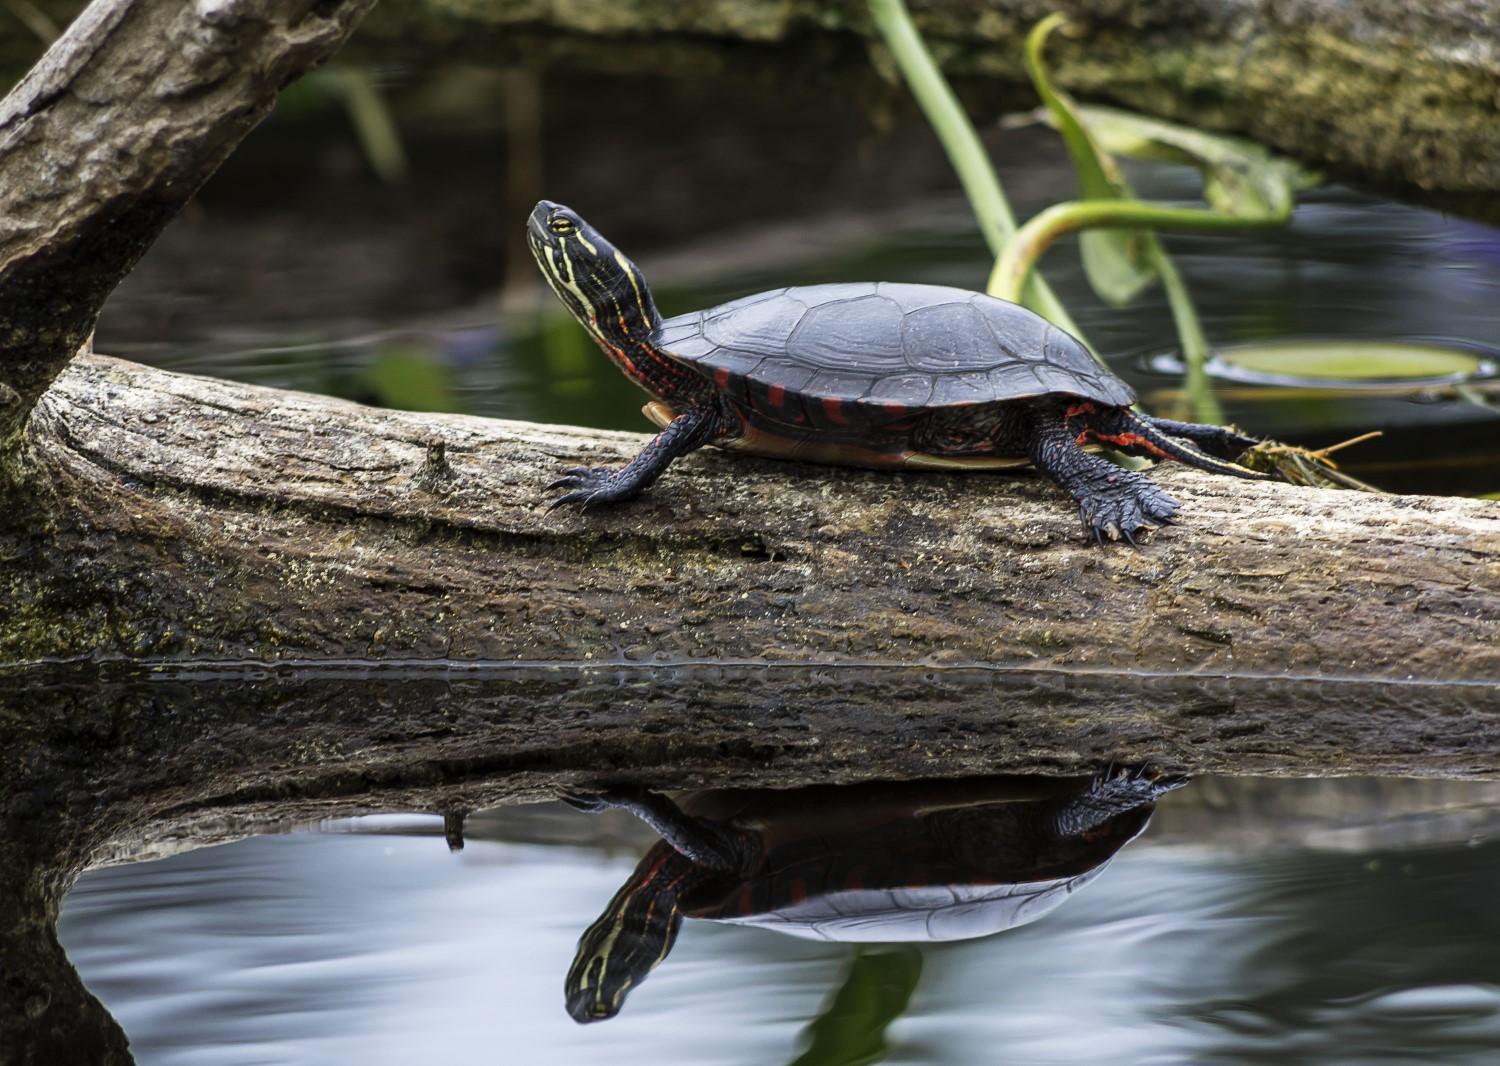 A small turtle resting on a log that is partially submerged in water.